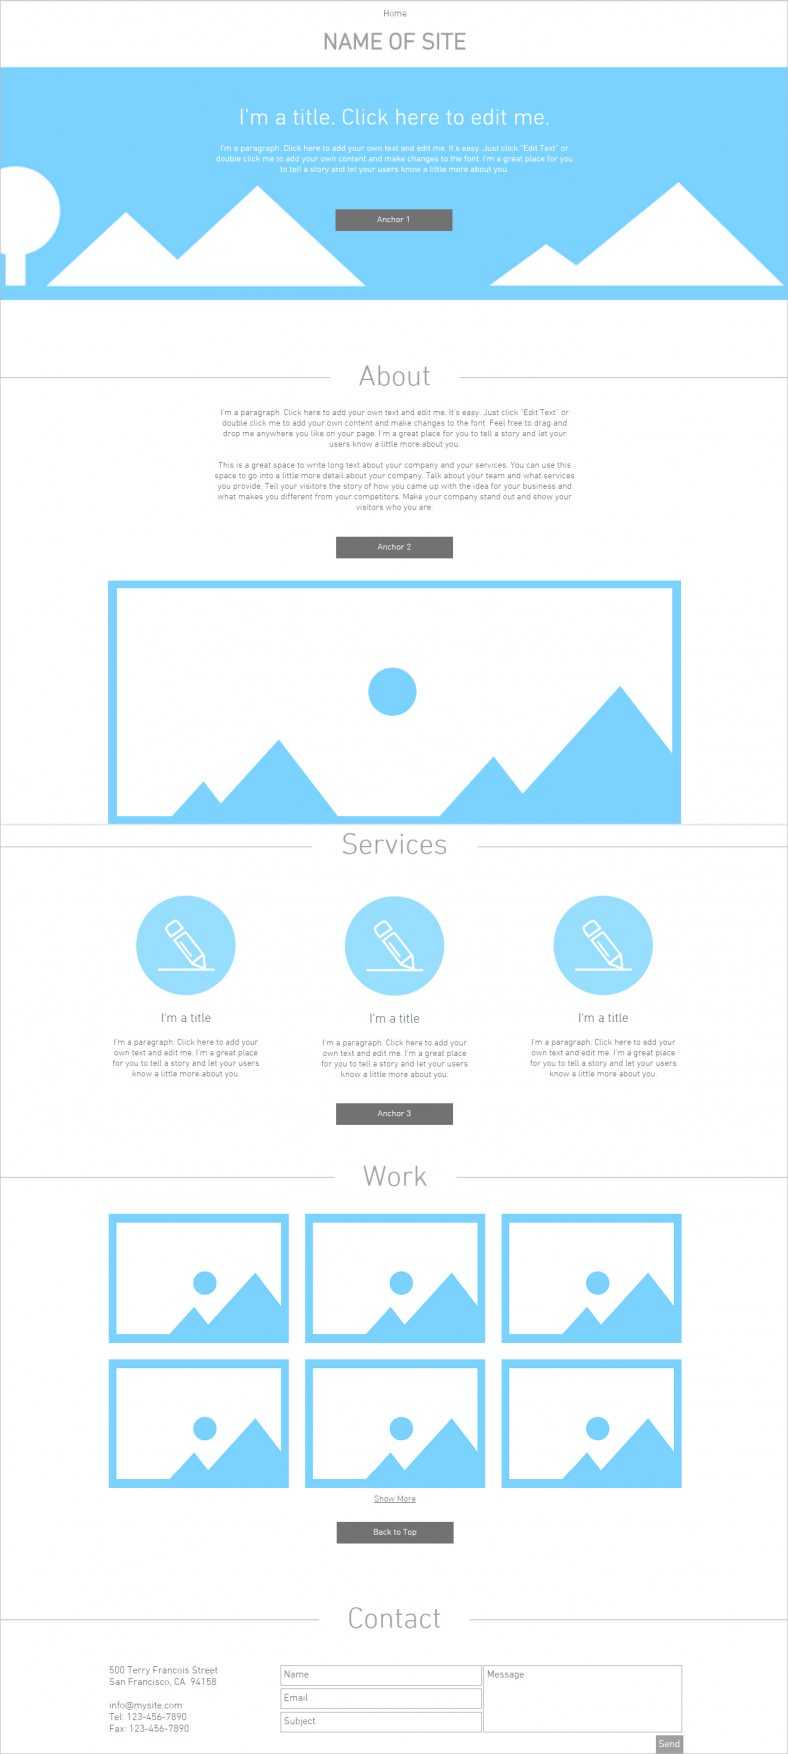 Blank Html5 Website Templates & Themes | Free & Premium Inside Html5 Blank Page Template